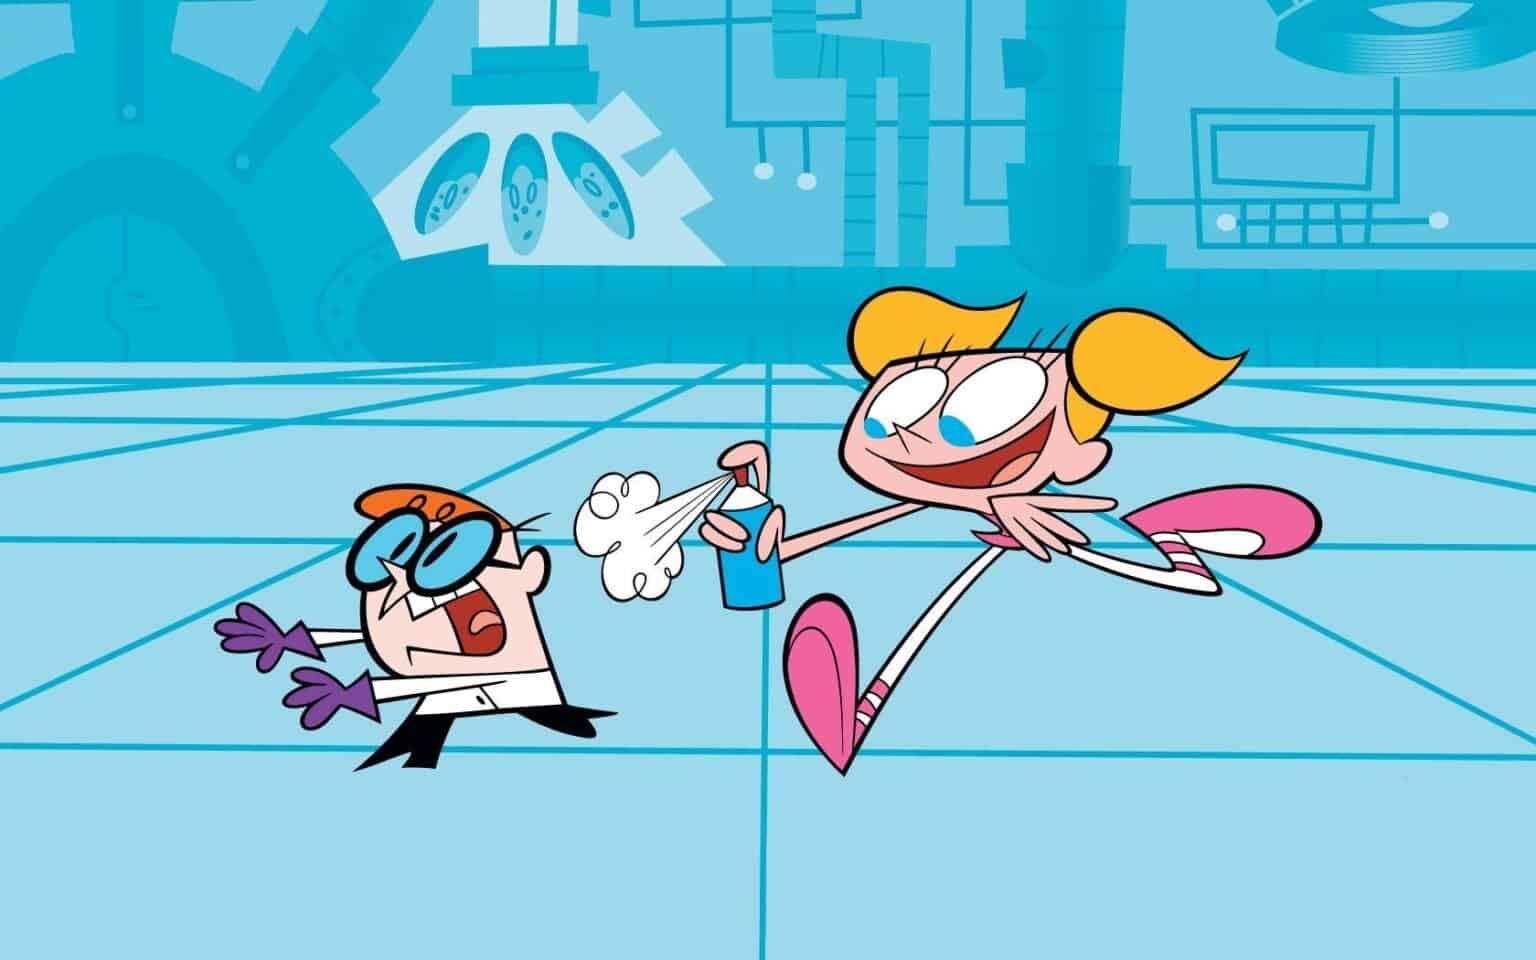 Why Dexter S Laboratory Deserves A Live Action Tv Show Fortress Of Solitude